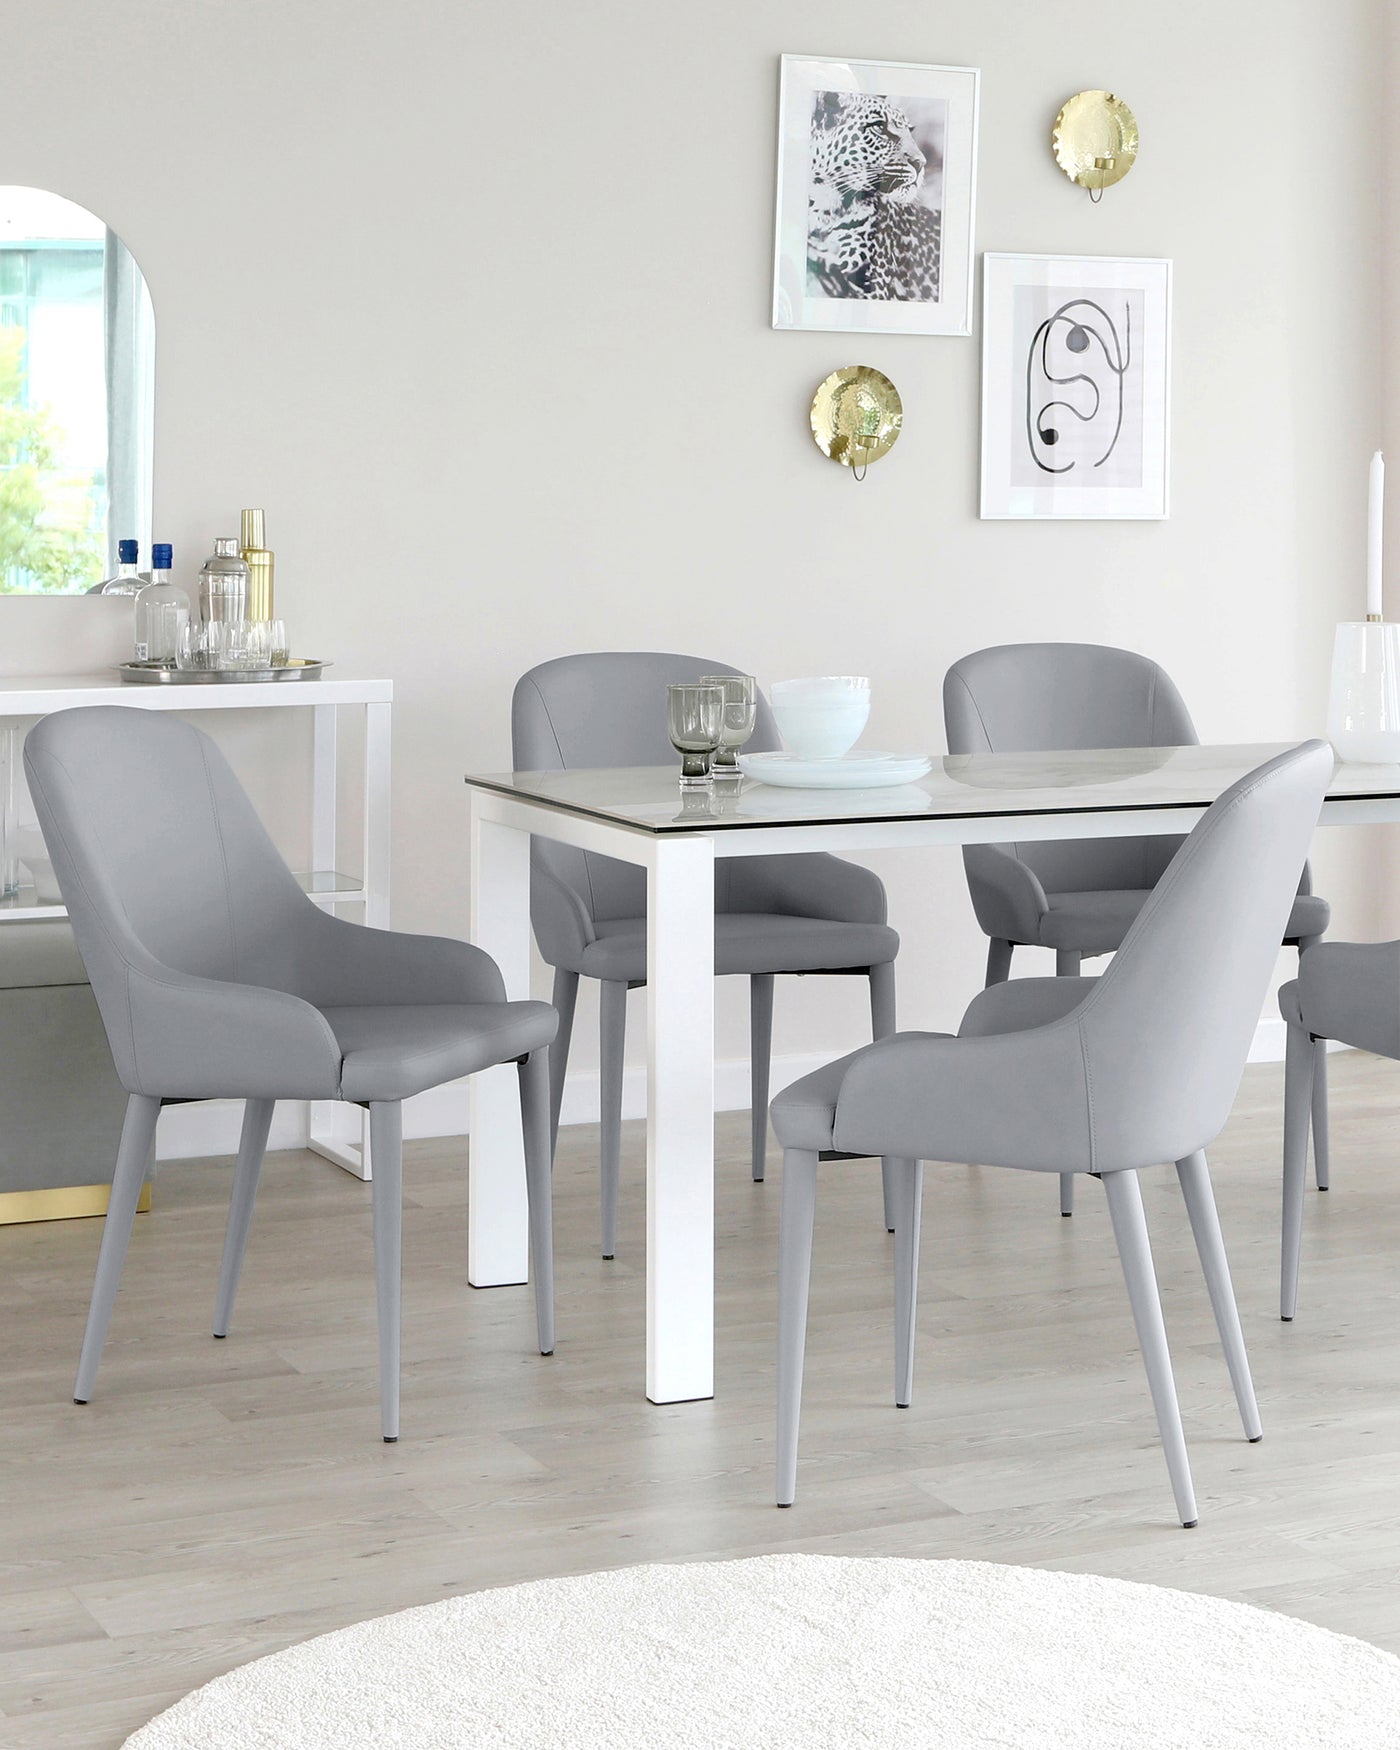 Modern dining set featuring a rectangular white table with a minimalist design and four matching grey upholstered chairs with sleek legs.